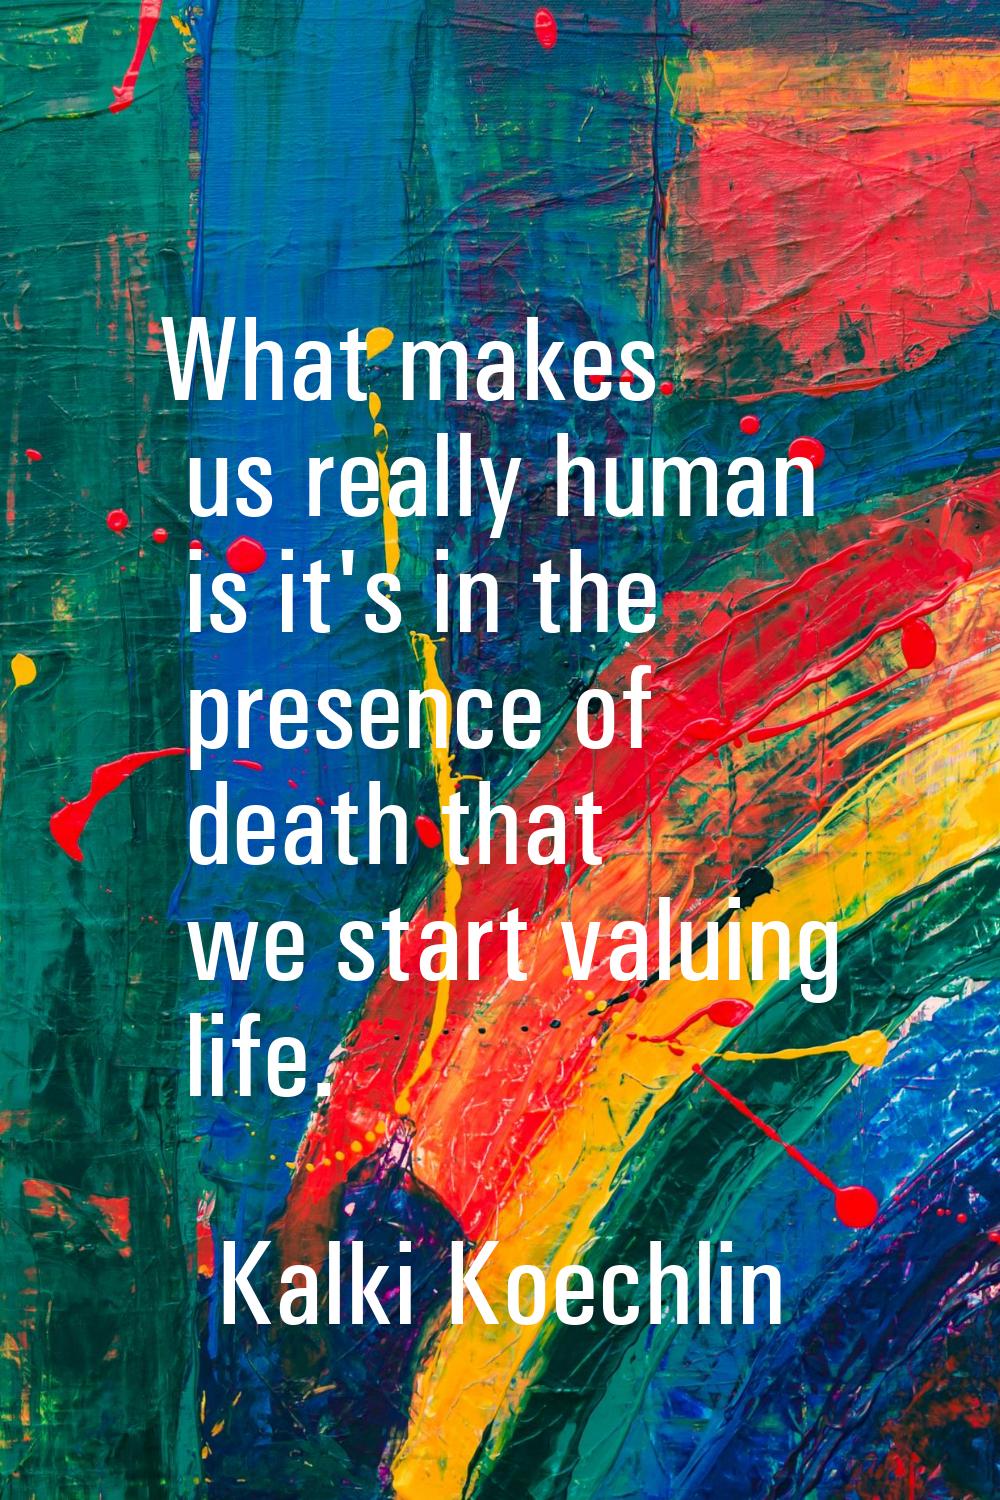 What makes us really human is it's in the presence of death that we start valuing life.